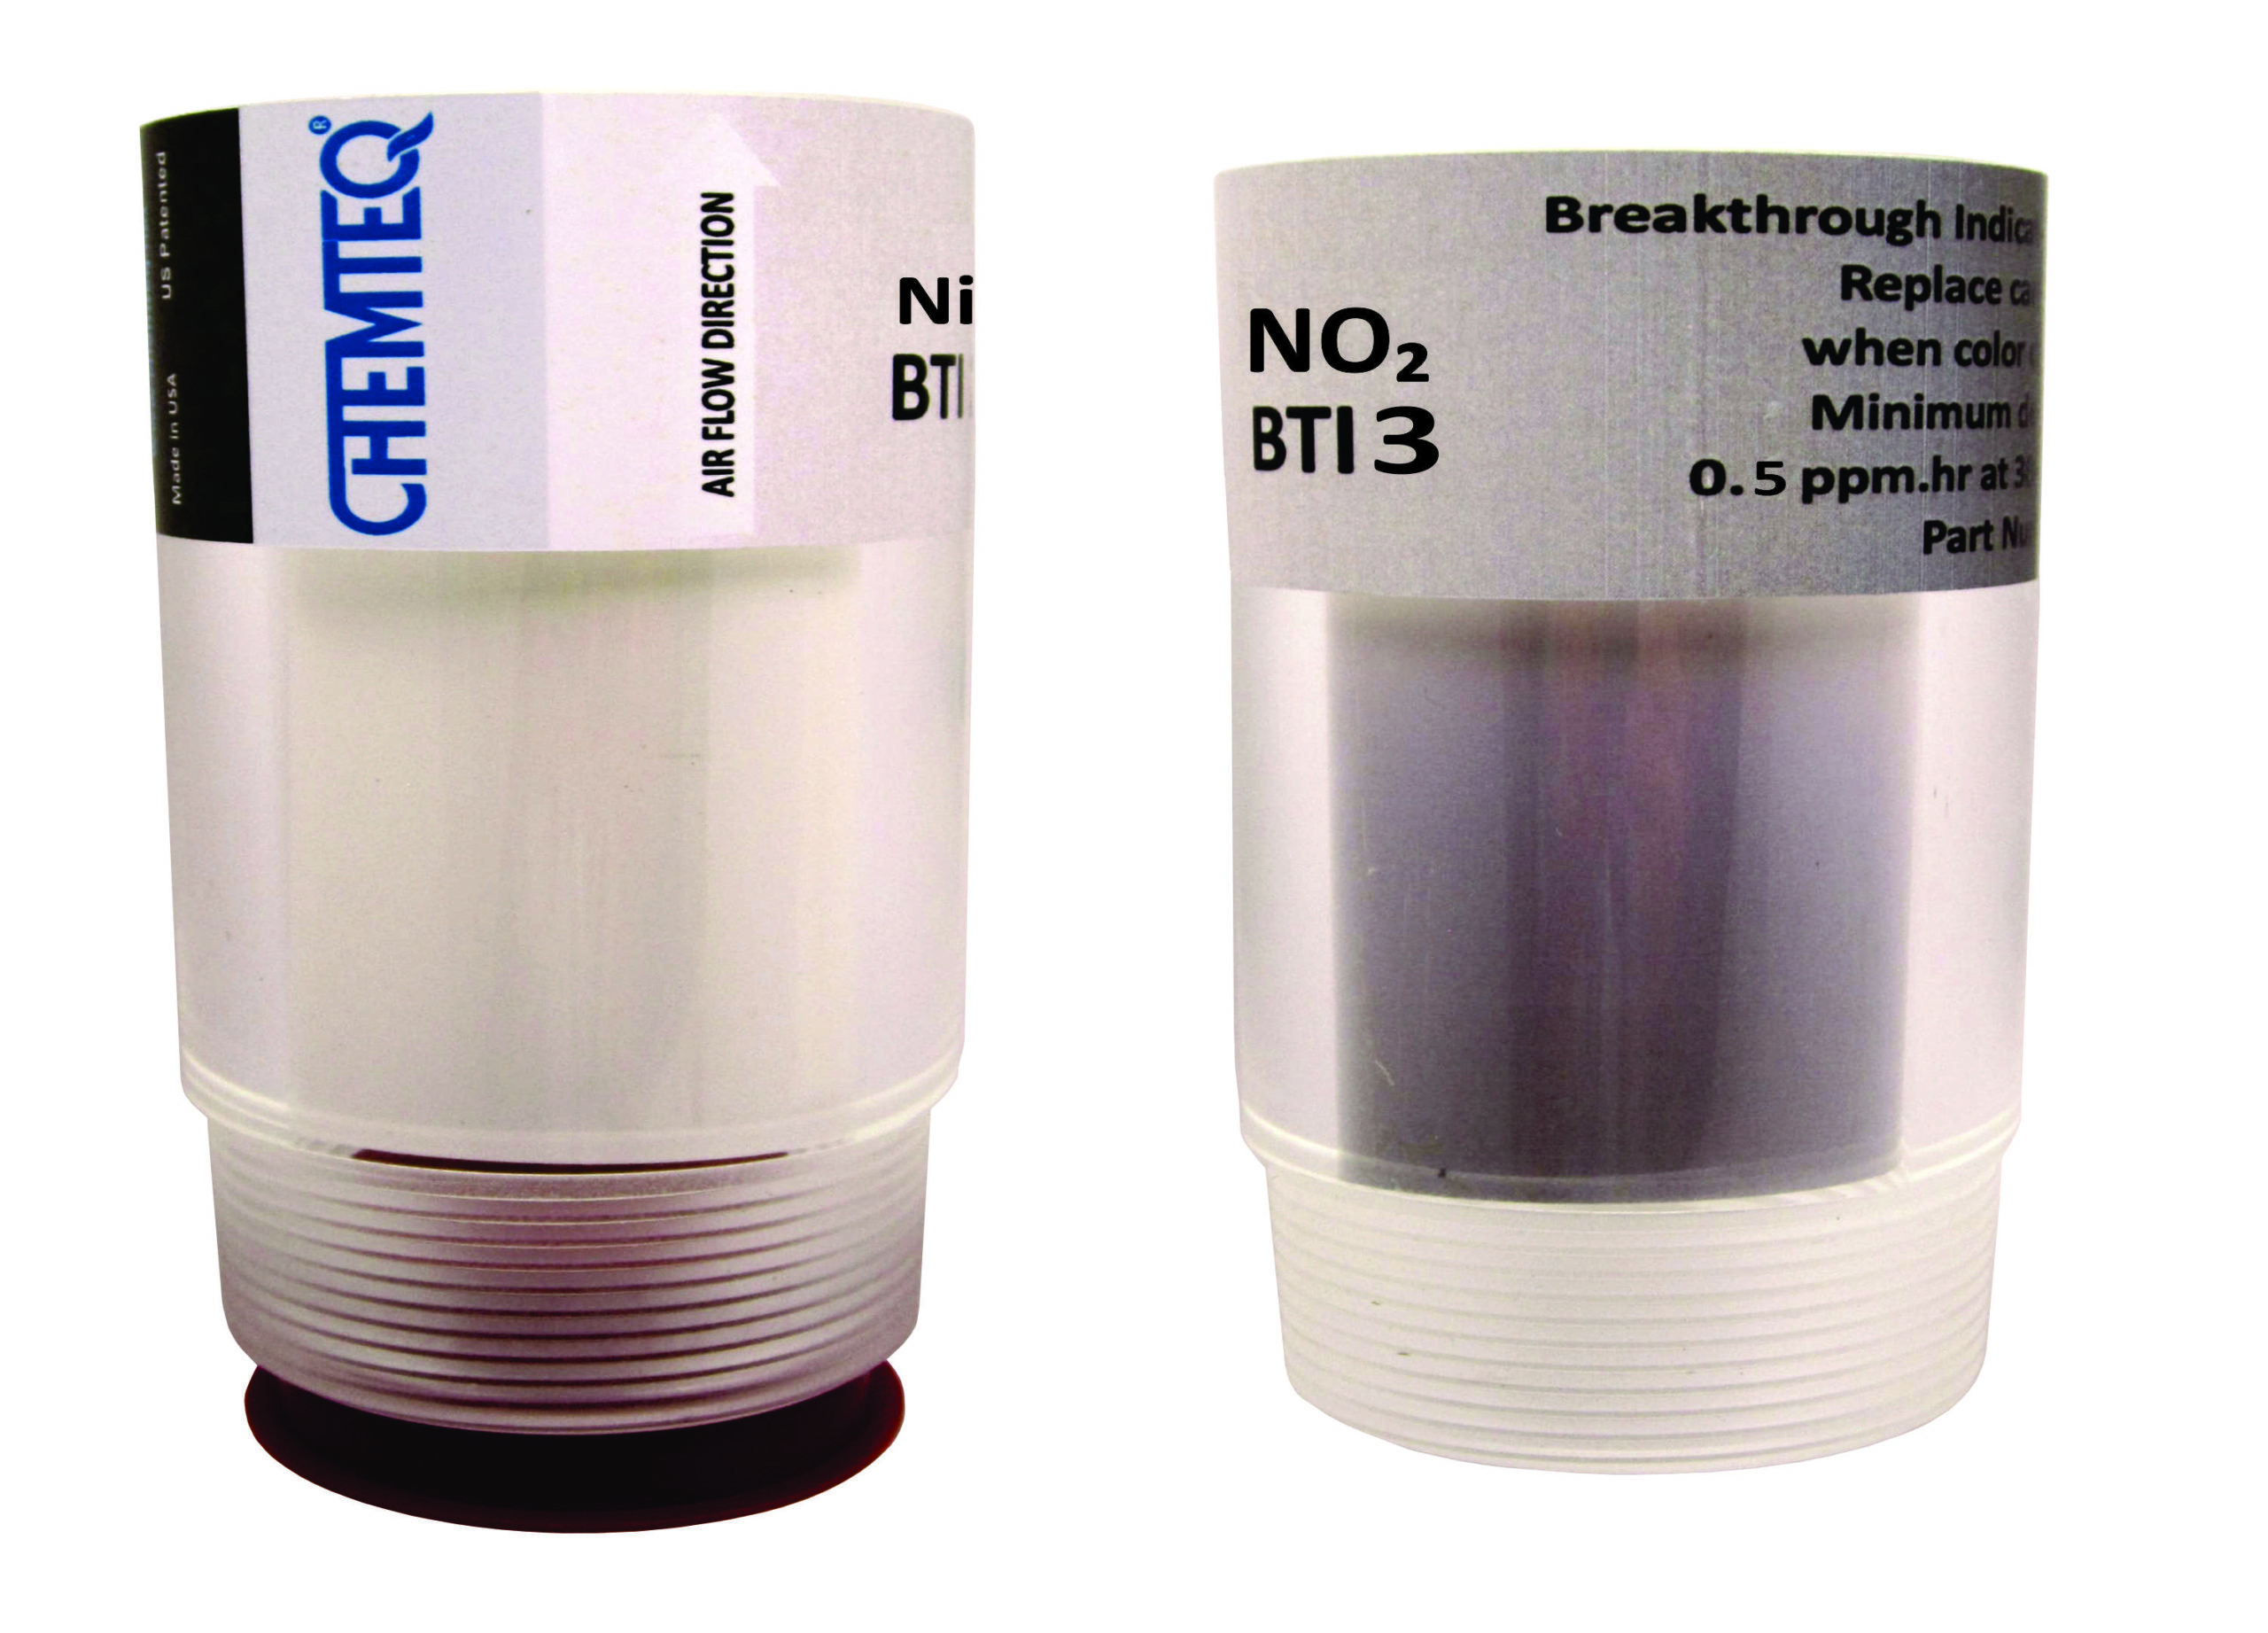 Nitrogen Dioxide Breakthrough Indicator (BTI3). The indicators are reliable and cost effective for protection from nitrogen dioxide.